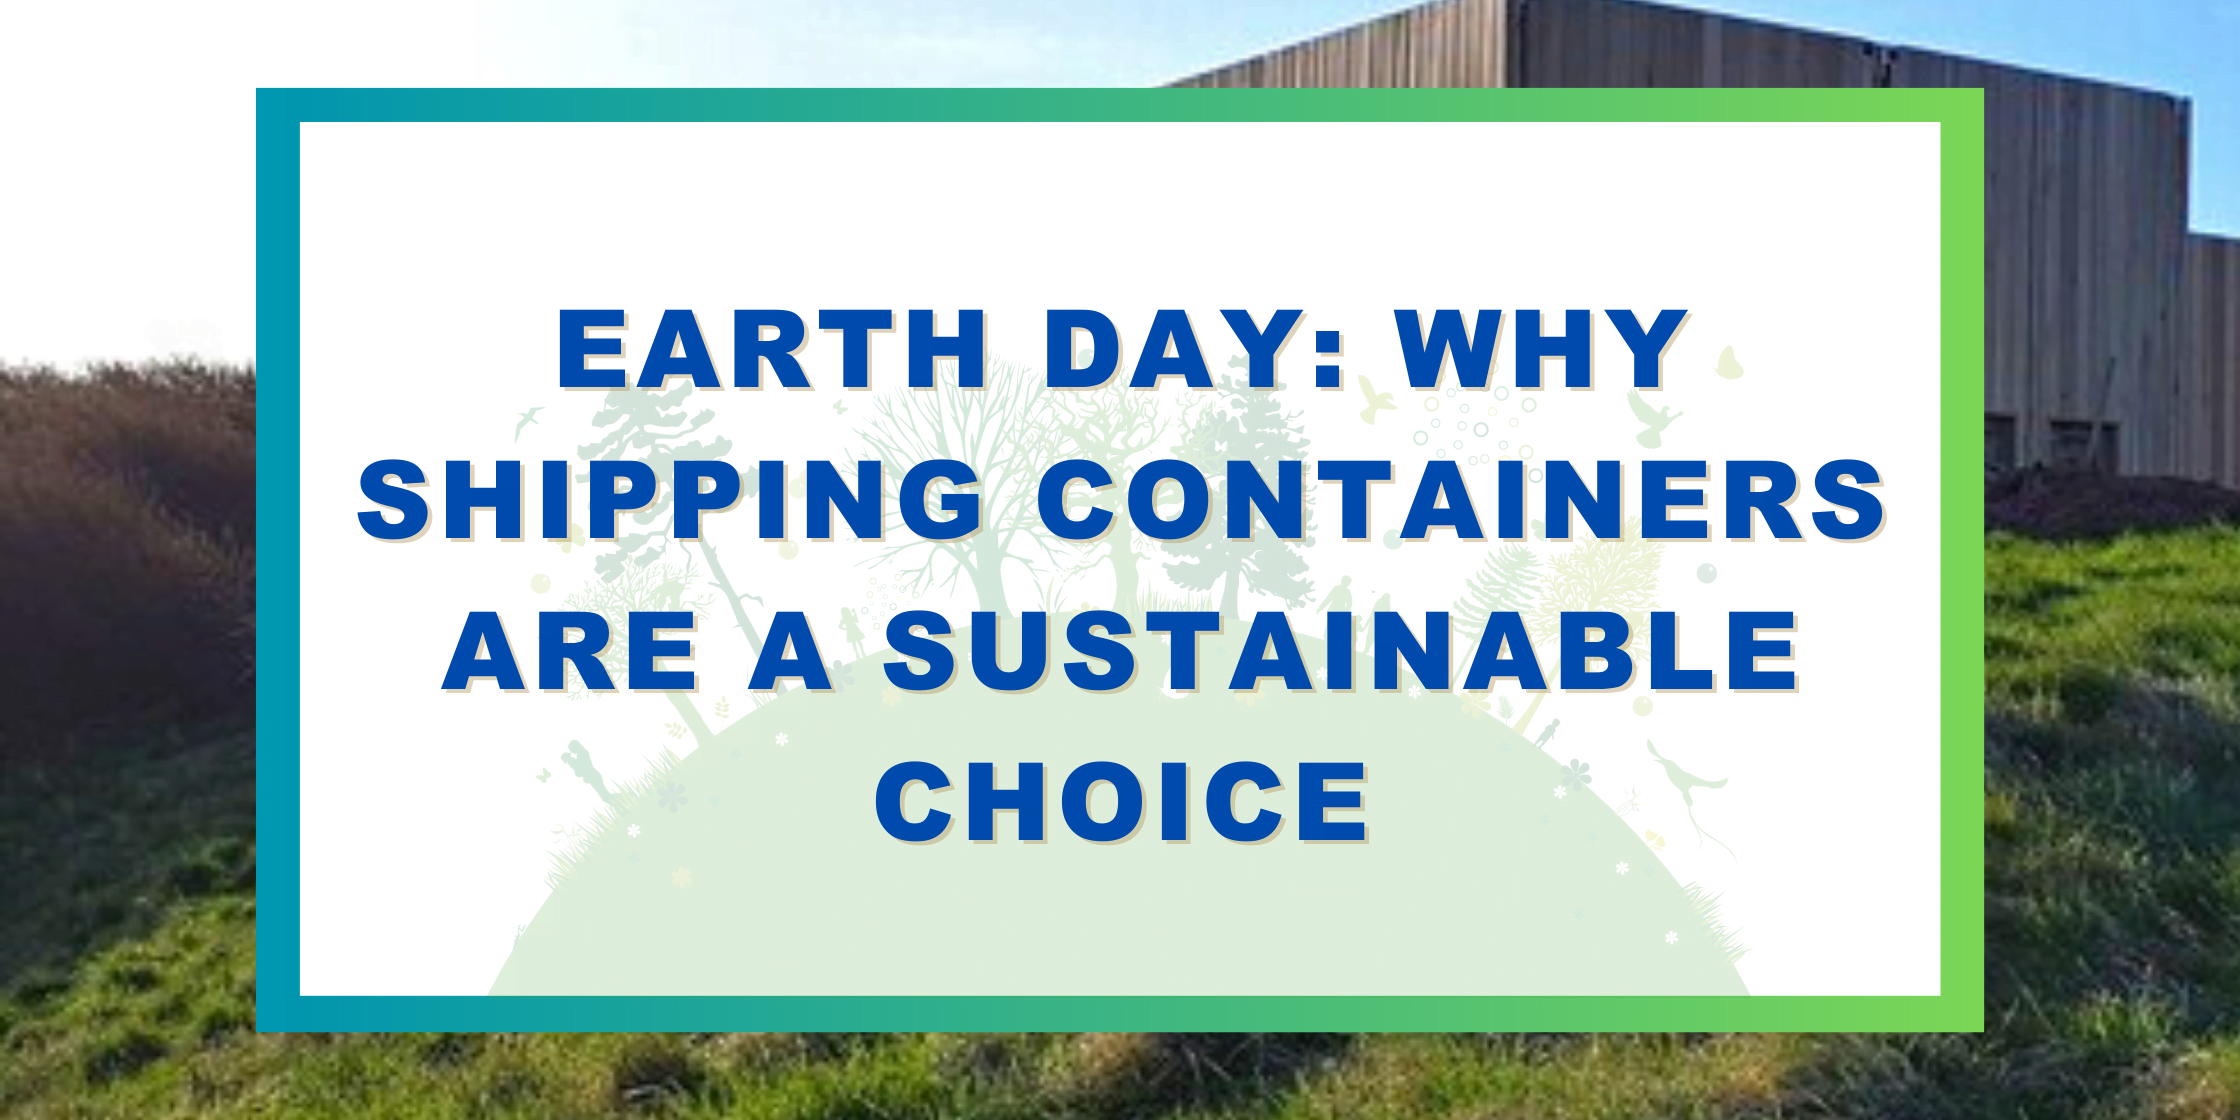 Earth Day: Why Shipping Containers Are A Sustainable Choice